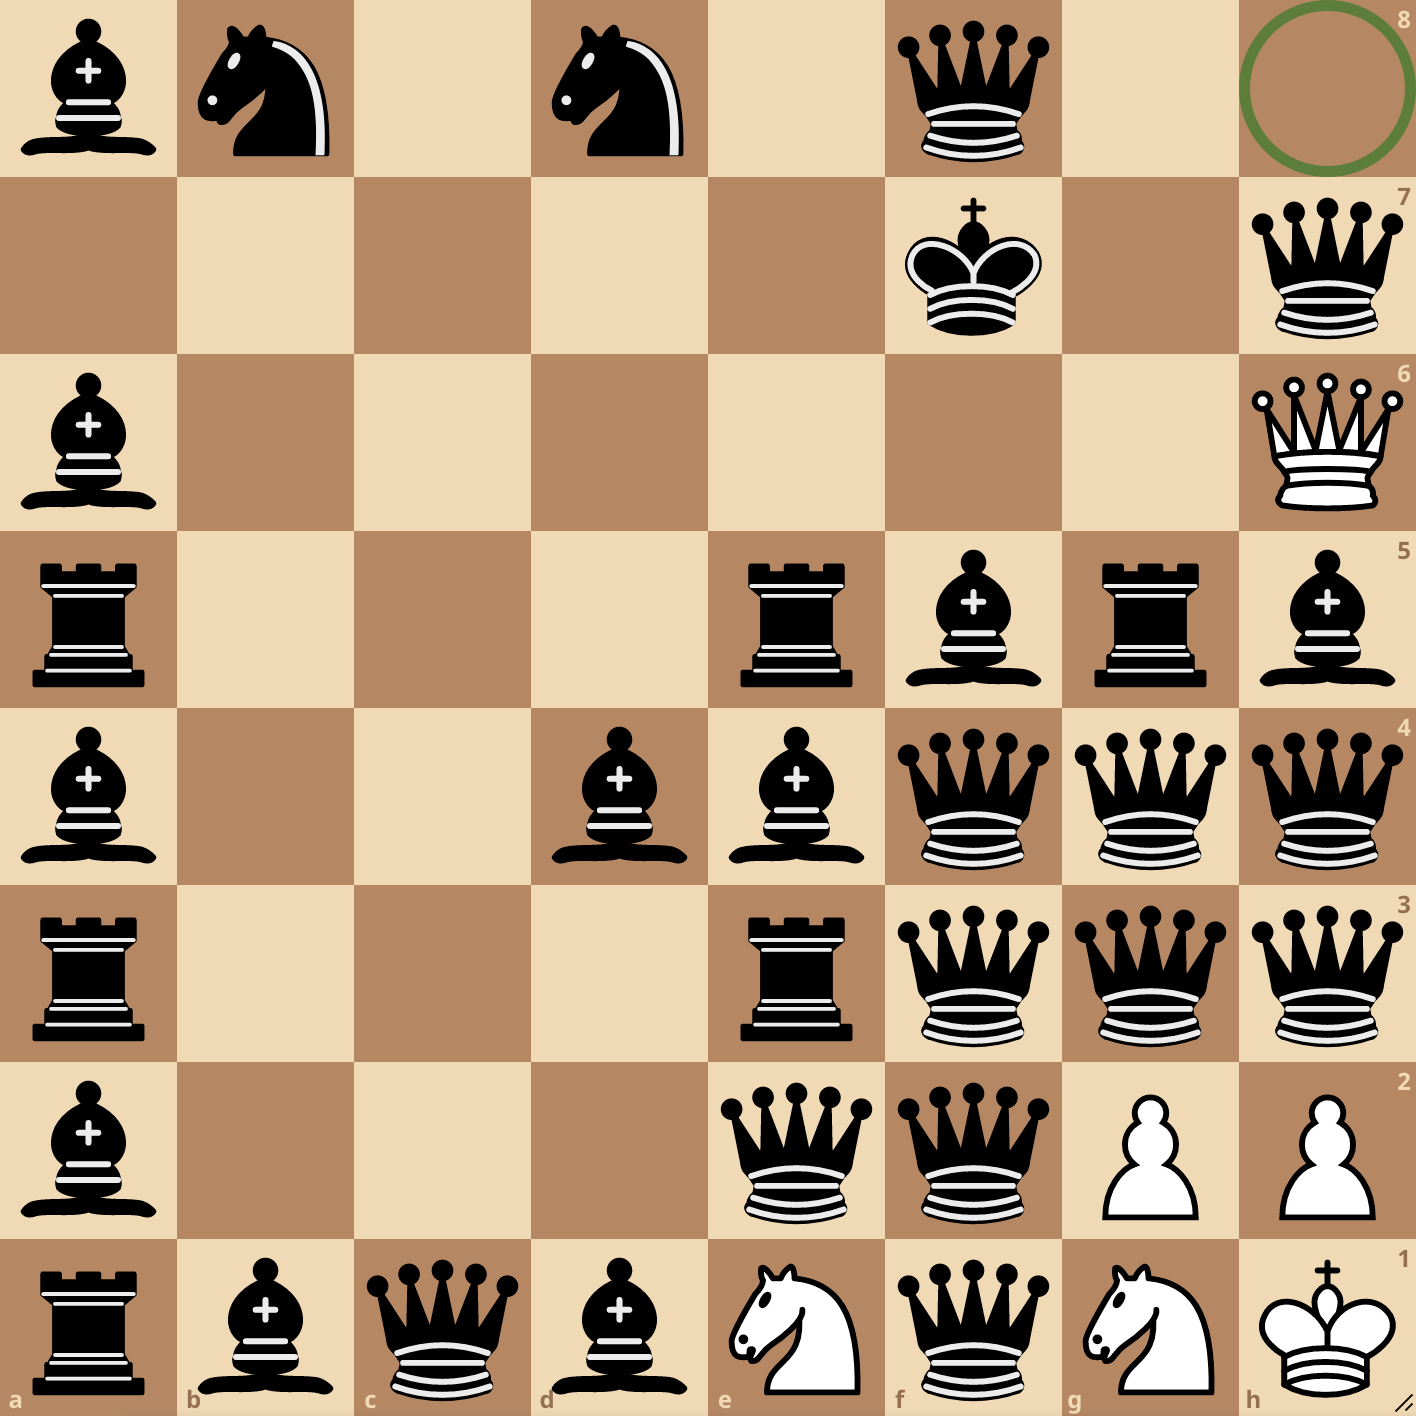 A chess board with a1 at the bottom left. A green circle marks h8. The board's FEN is below.